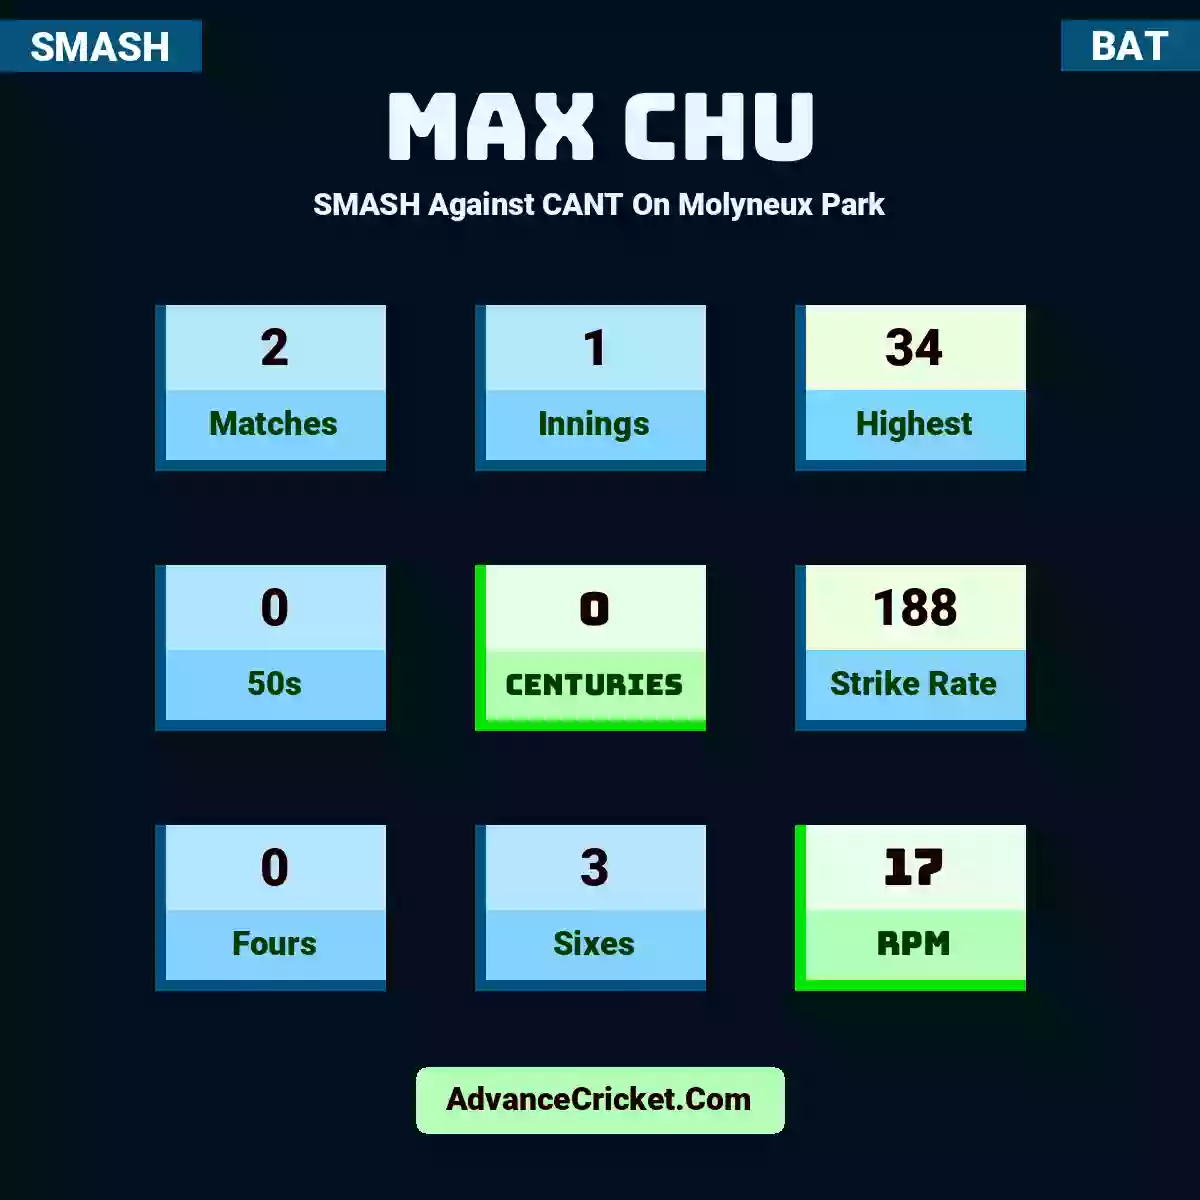 Max Chu SMASH  Against CANT On Molyneux Park, Max Chu played 2 matches, scored 34 runs as highest, 0 half-centuries, and 0 centuries, with a strike rate of 188. M.Chu hit 0 fours and 3 sixes, with an RPM of 17.